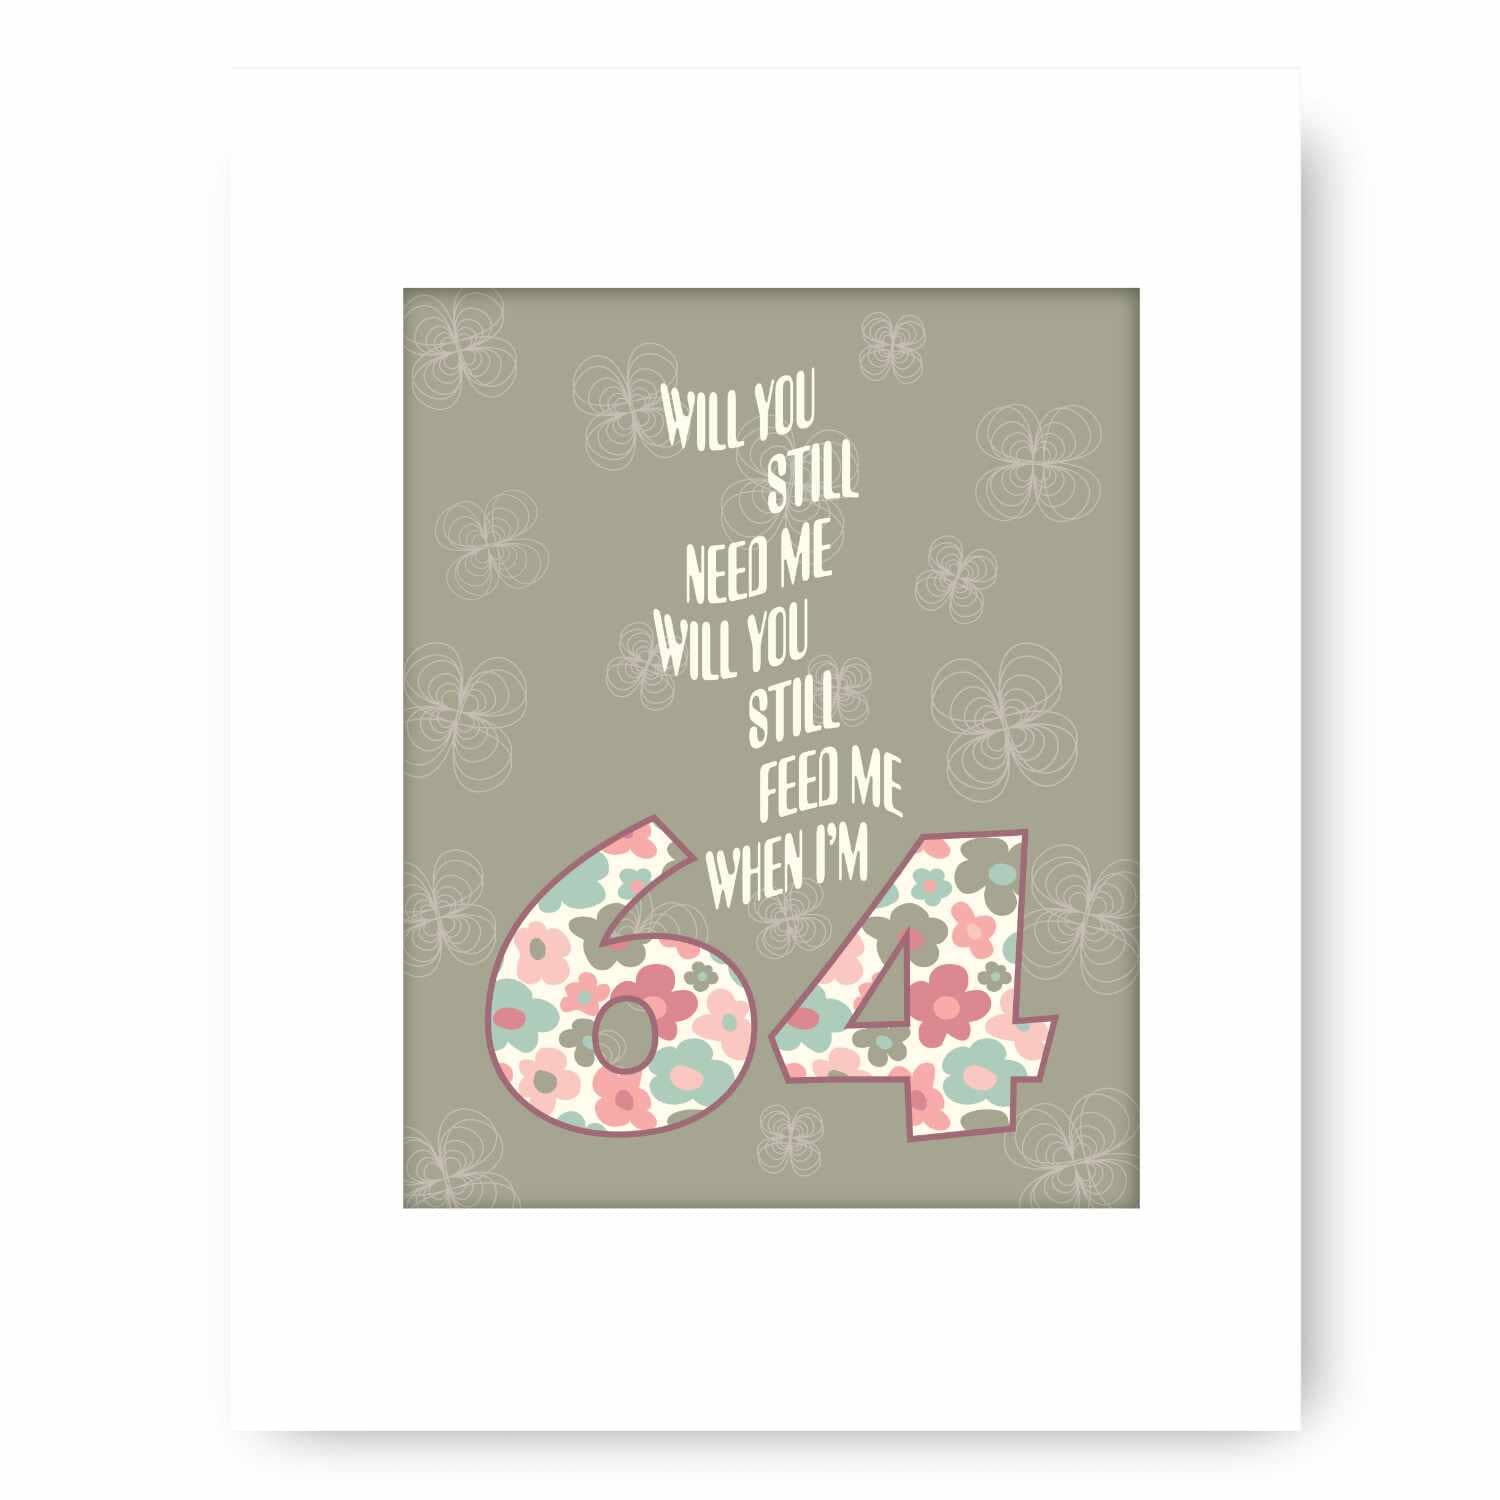 When I'm Sixty-Four 64 by the Beatles - Song Lyric Art Print Song Lyrics Art Song Lyrics Art 8x10 White Matted Print 